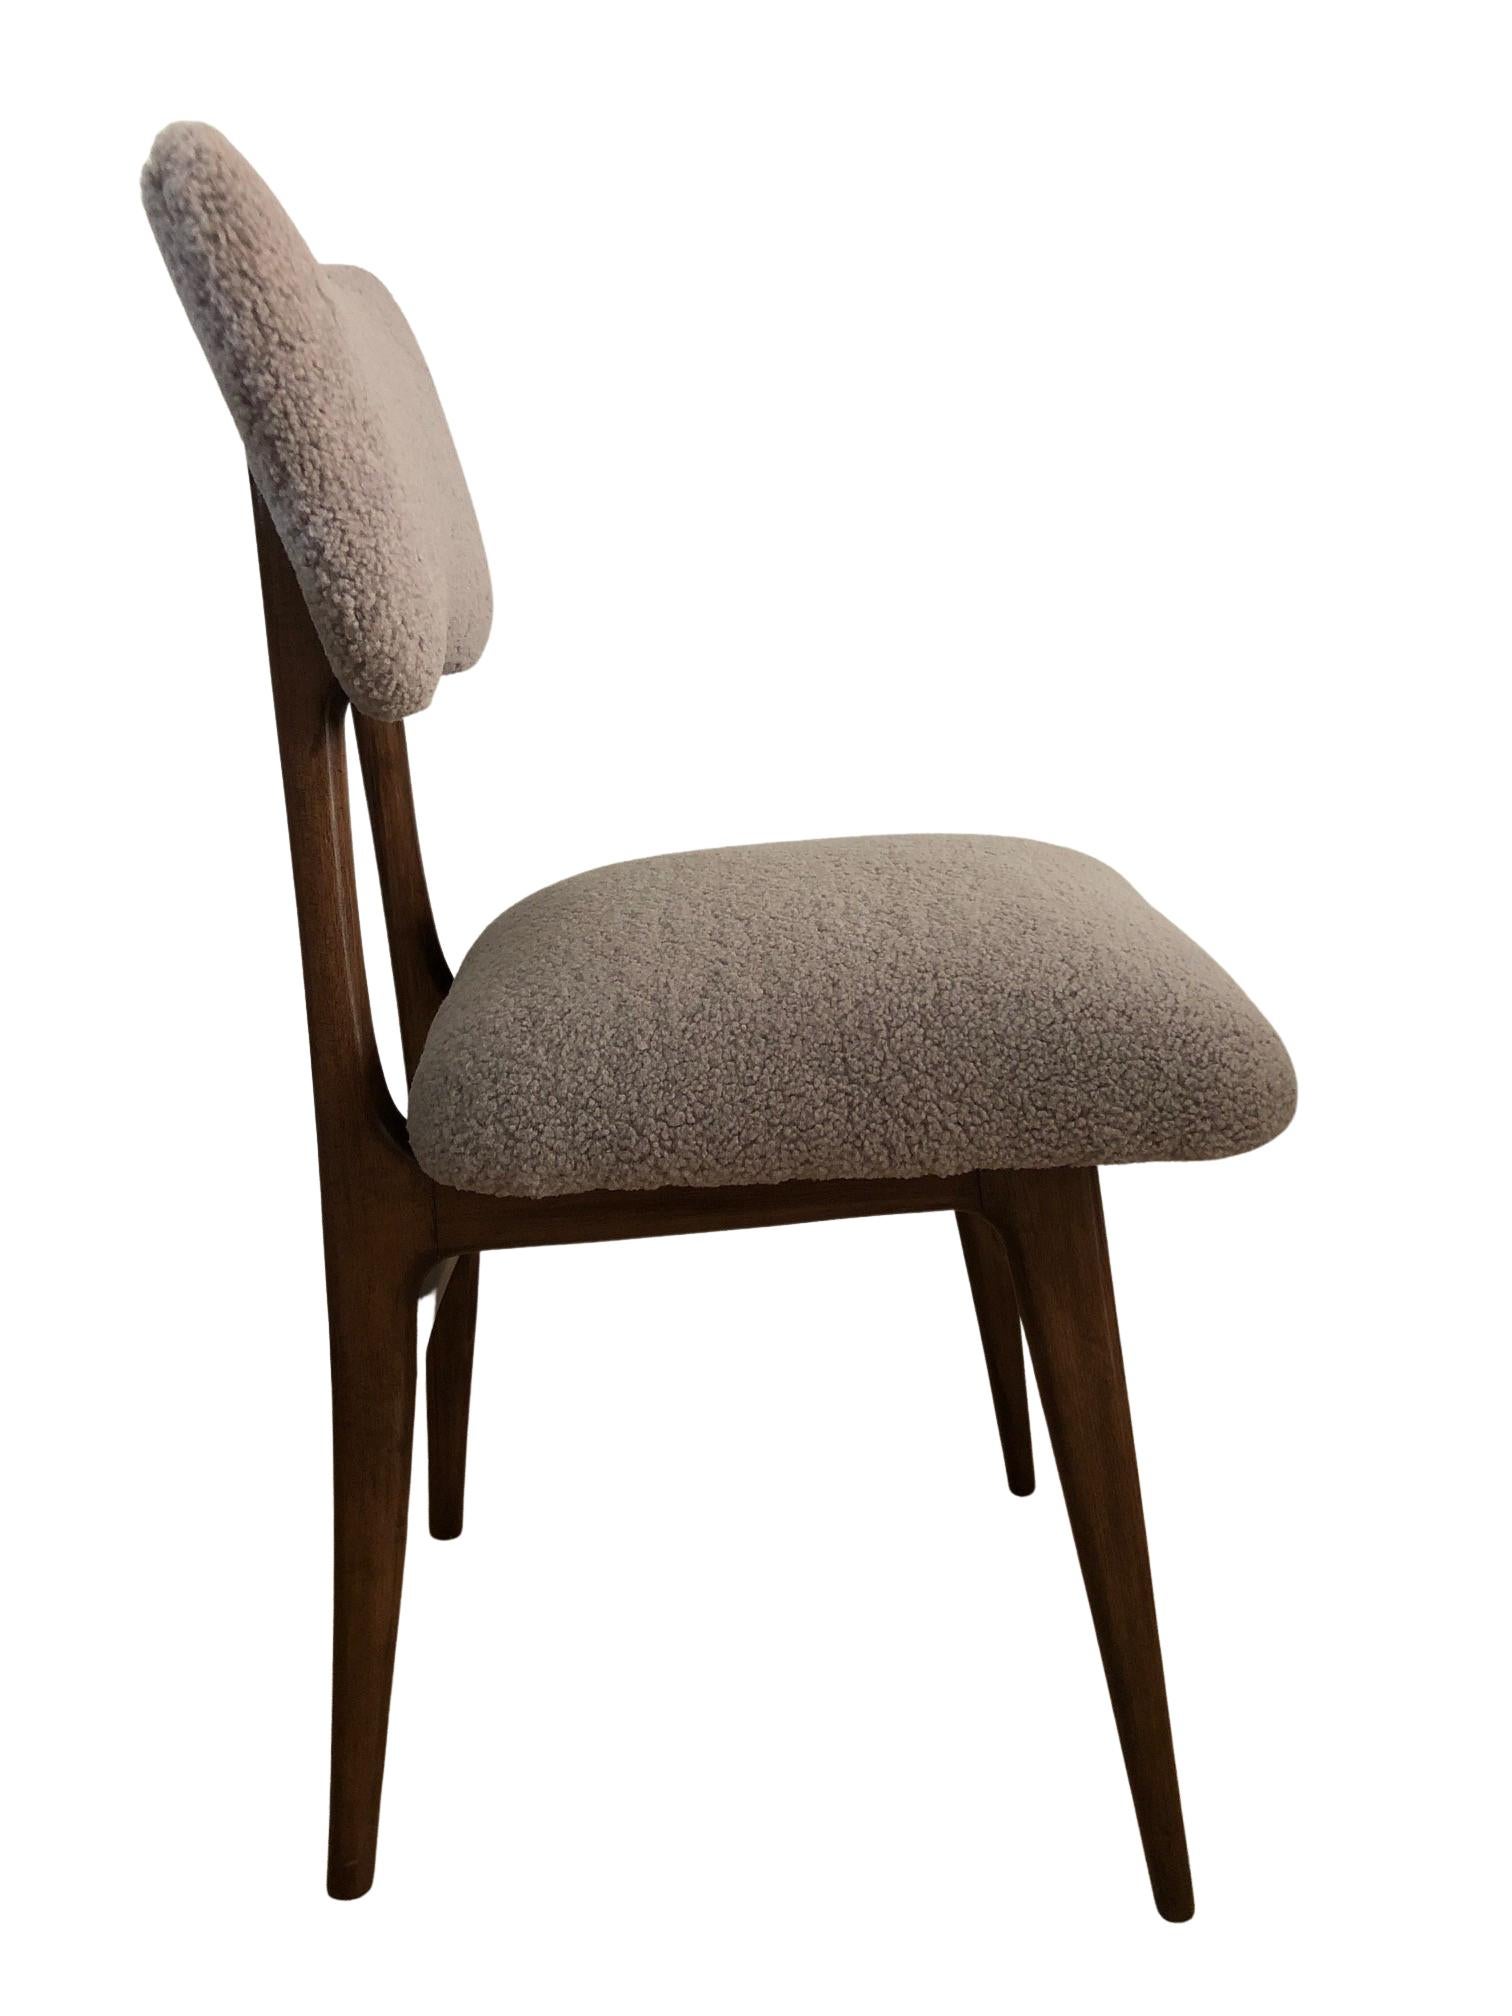 Hand-Crafted Set of Two Midcentury Beige Bouclé Dining Chairs, Europe, 1960s For Sale